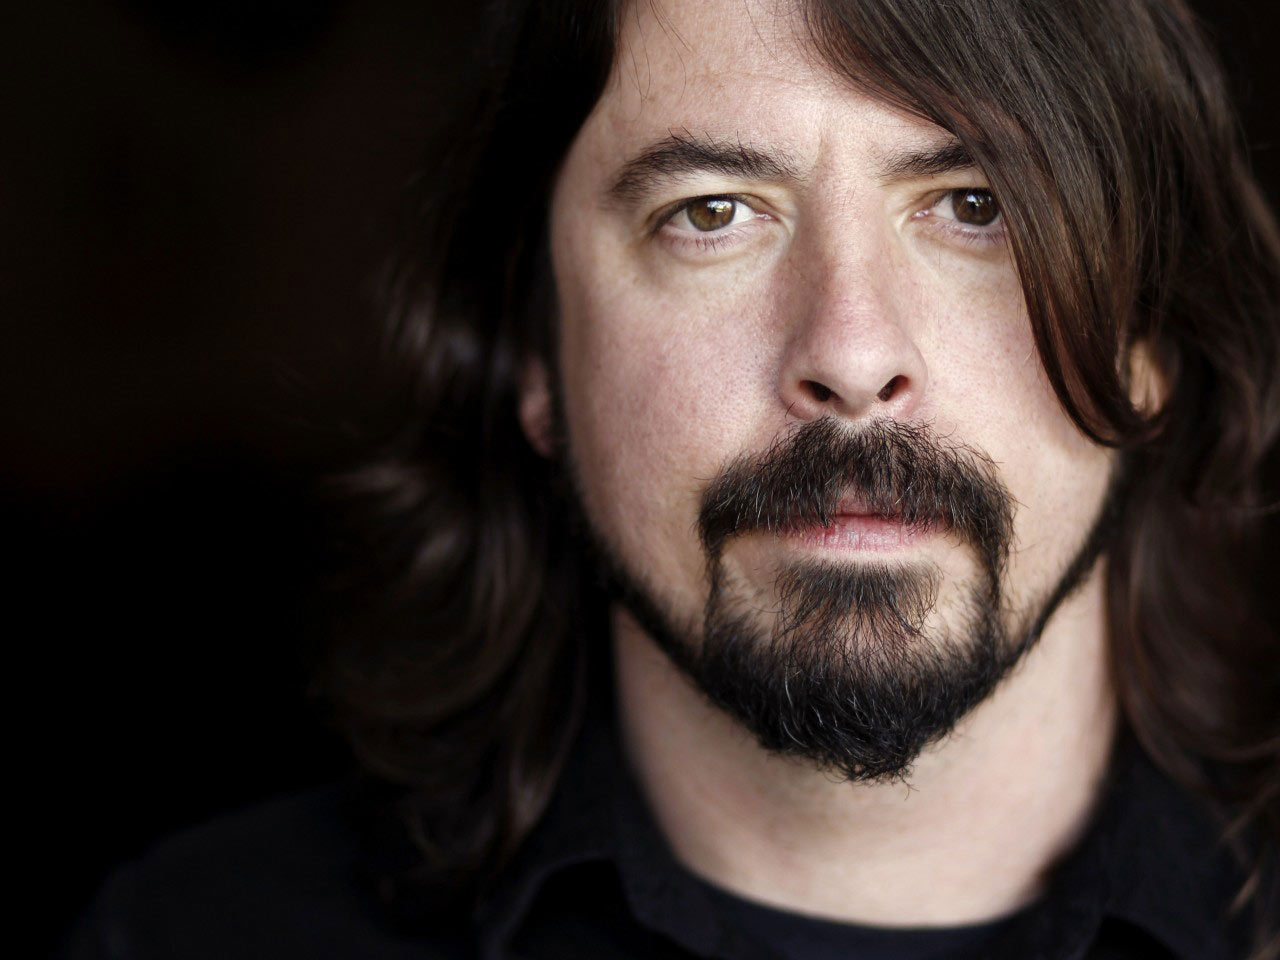 how much money does dave grohl make from nirvana